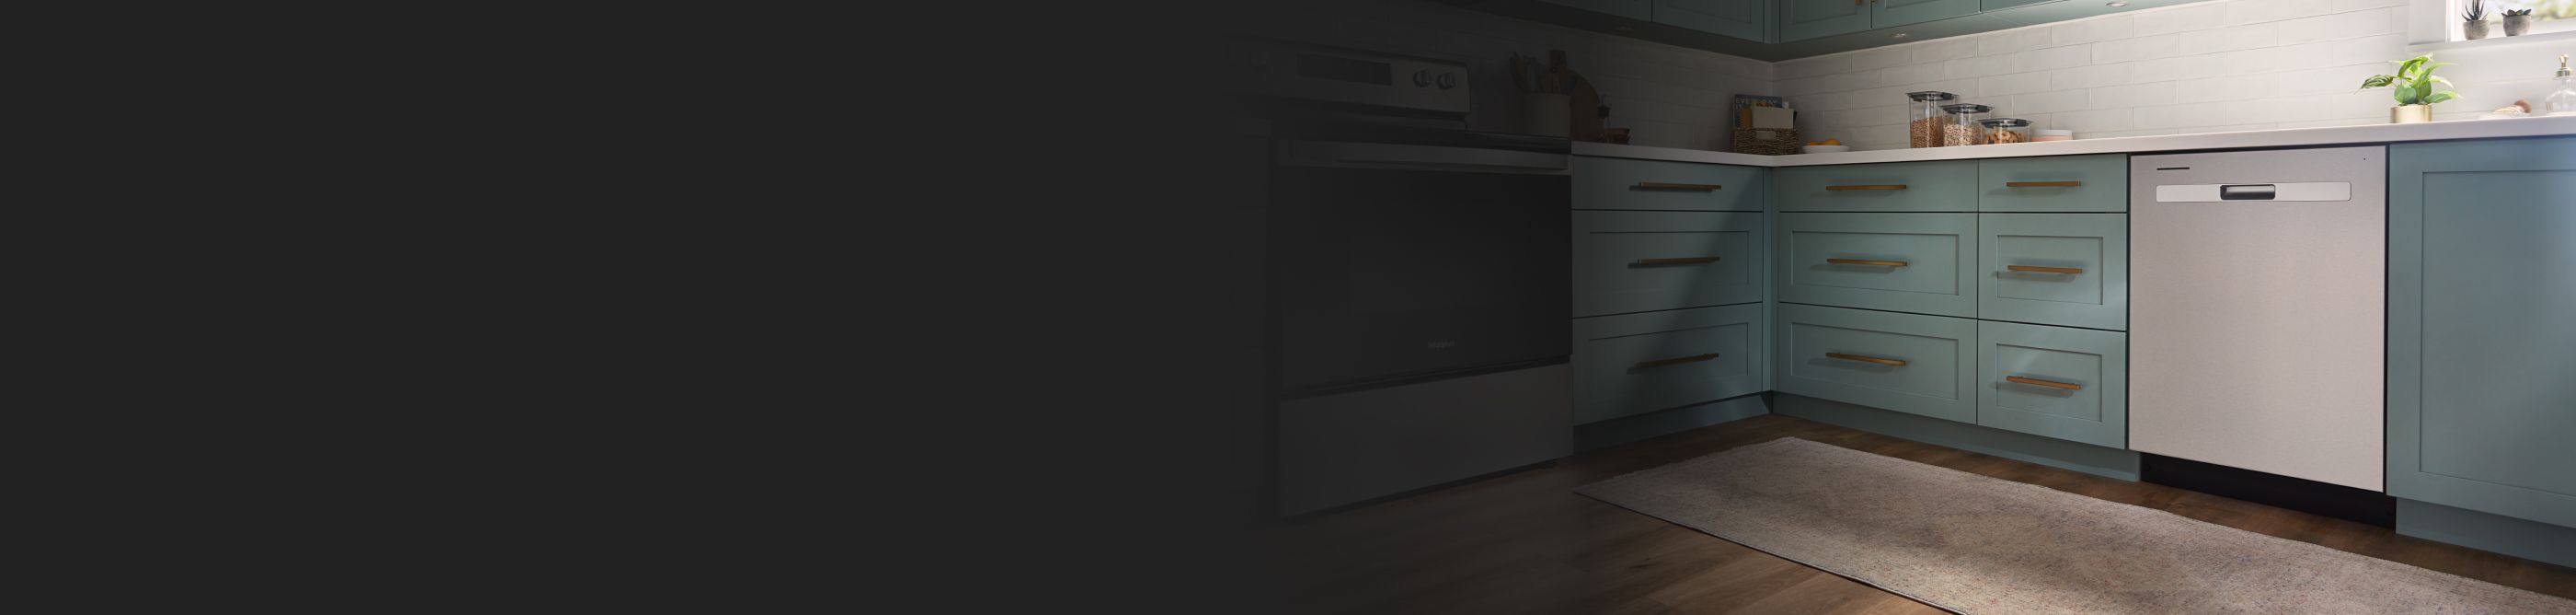 Whirlpool® electric range in a kitchen with teal cabinets